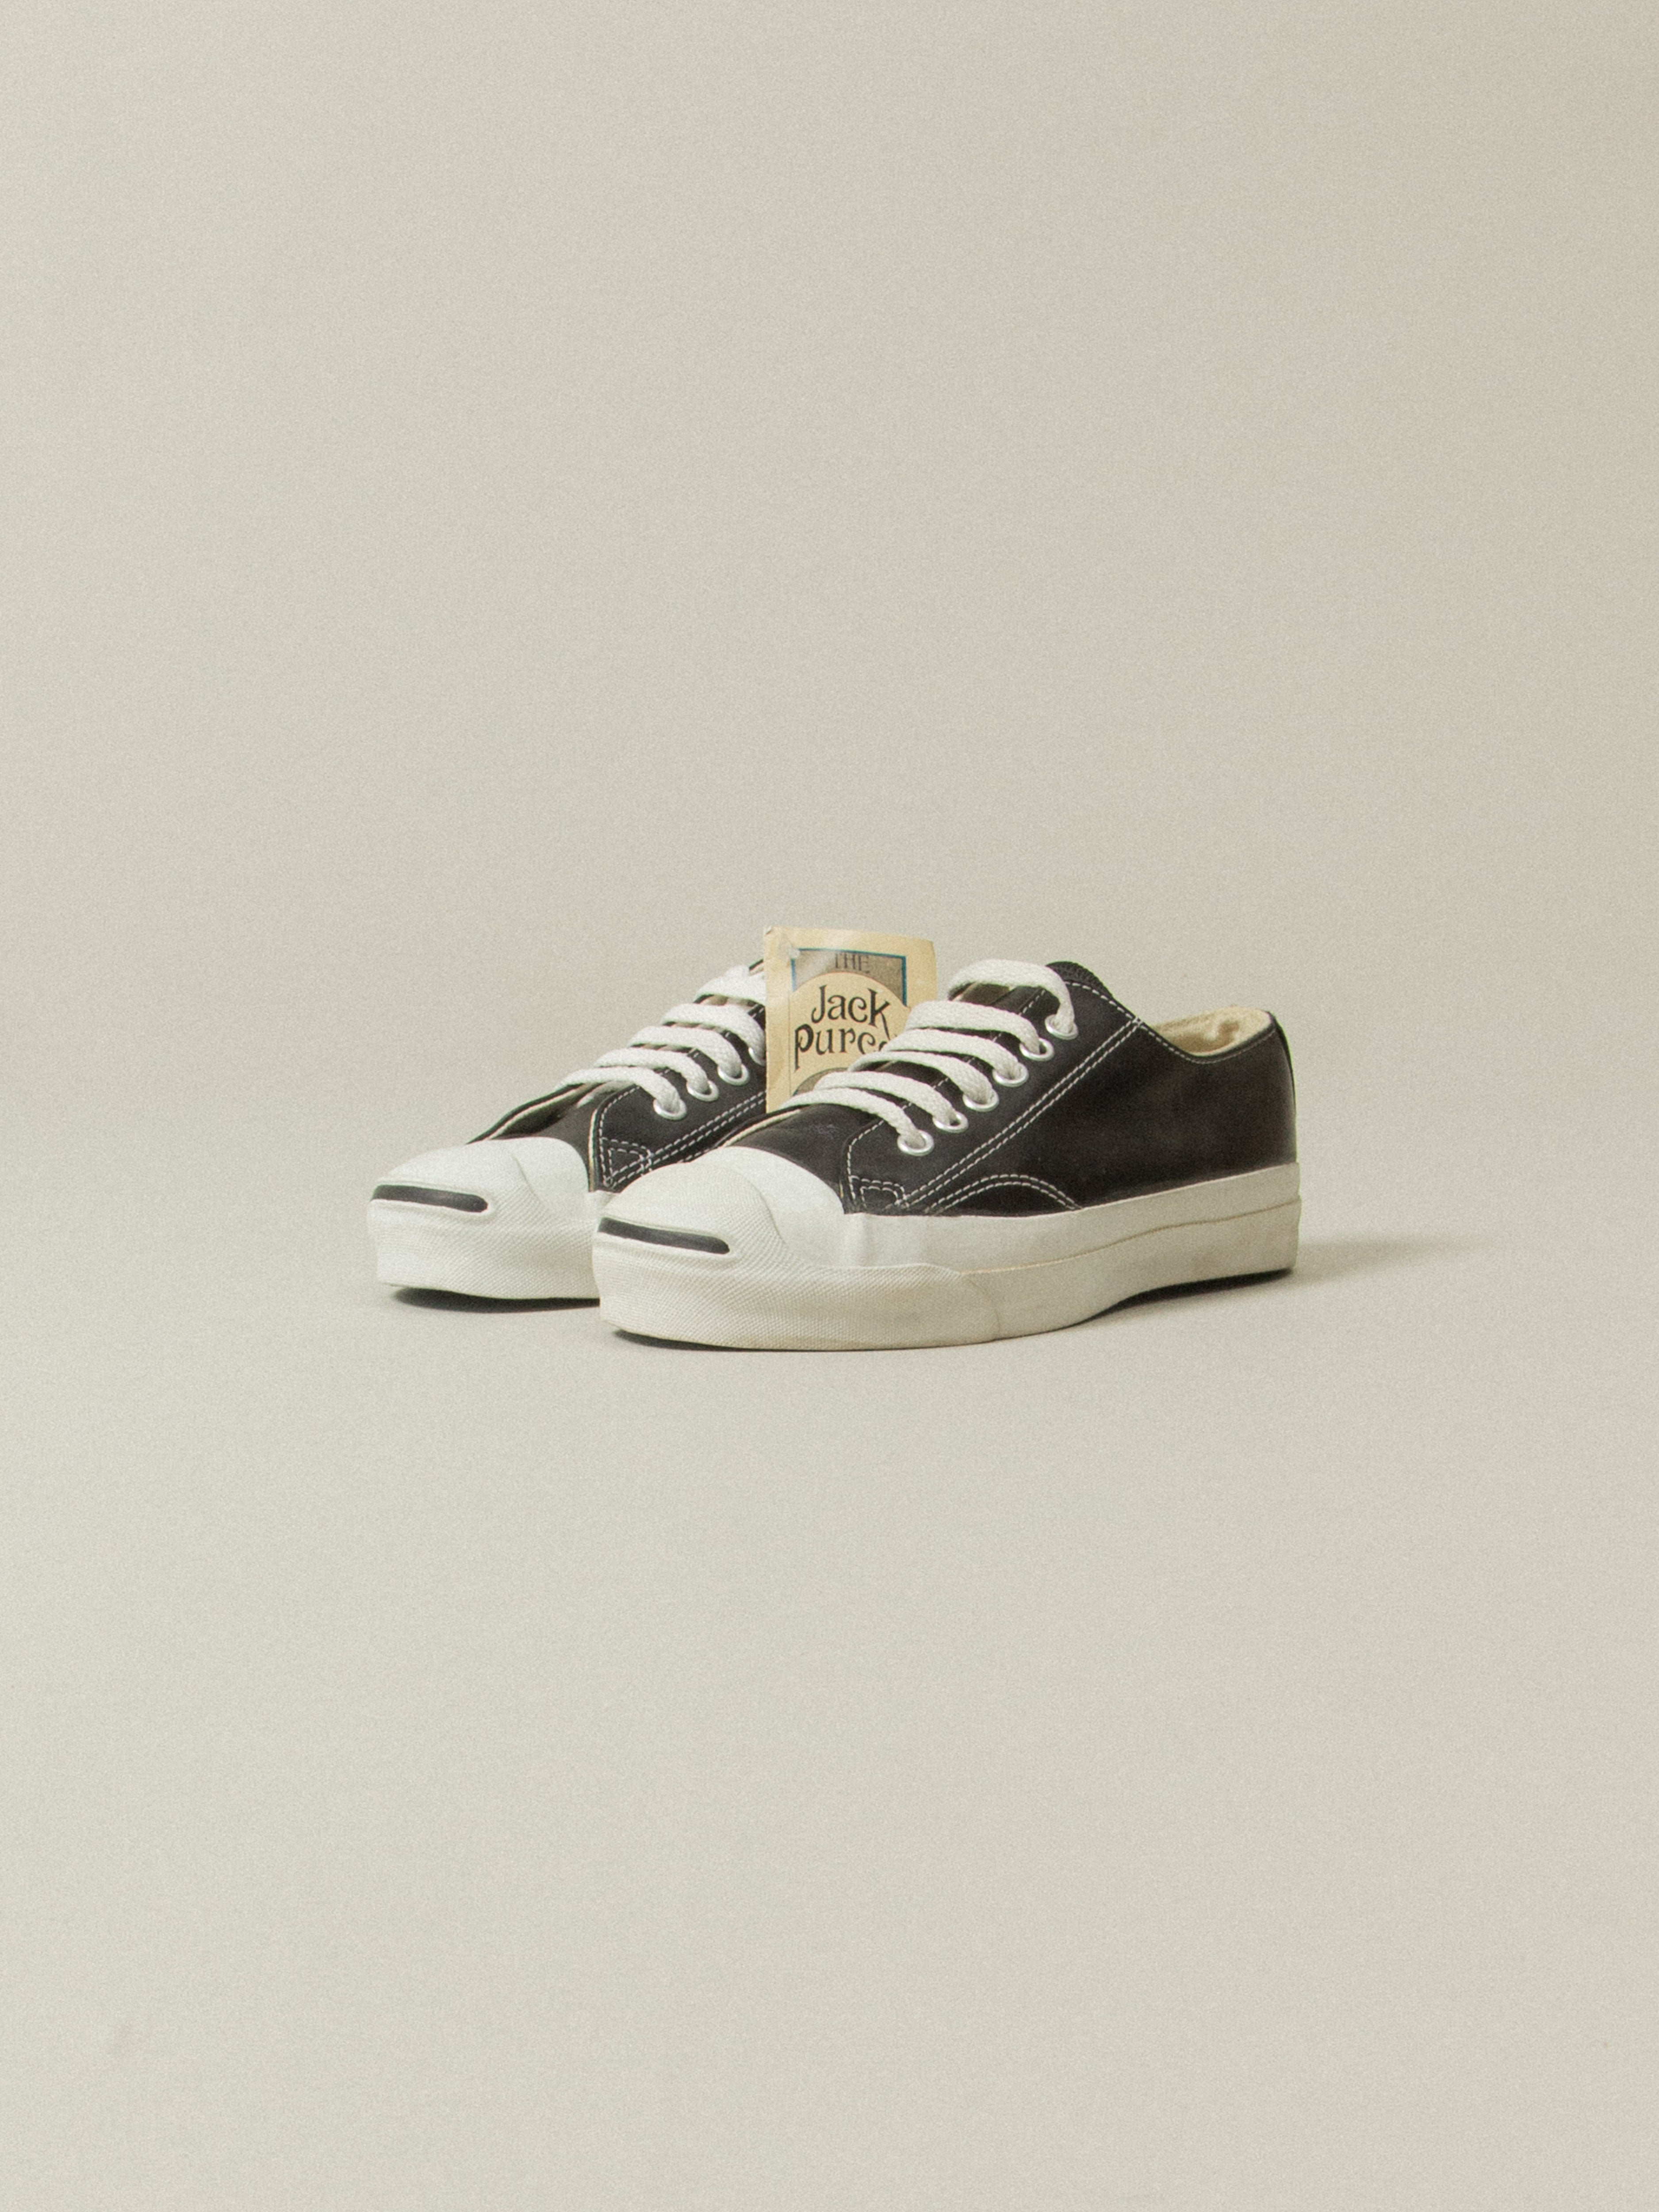 90's  dead CONVERSE Jack Purcell